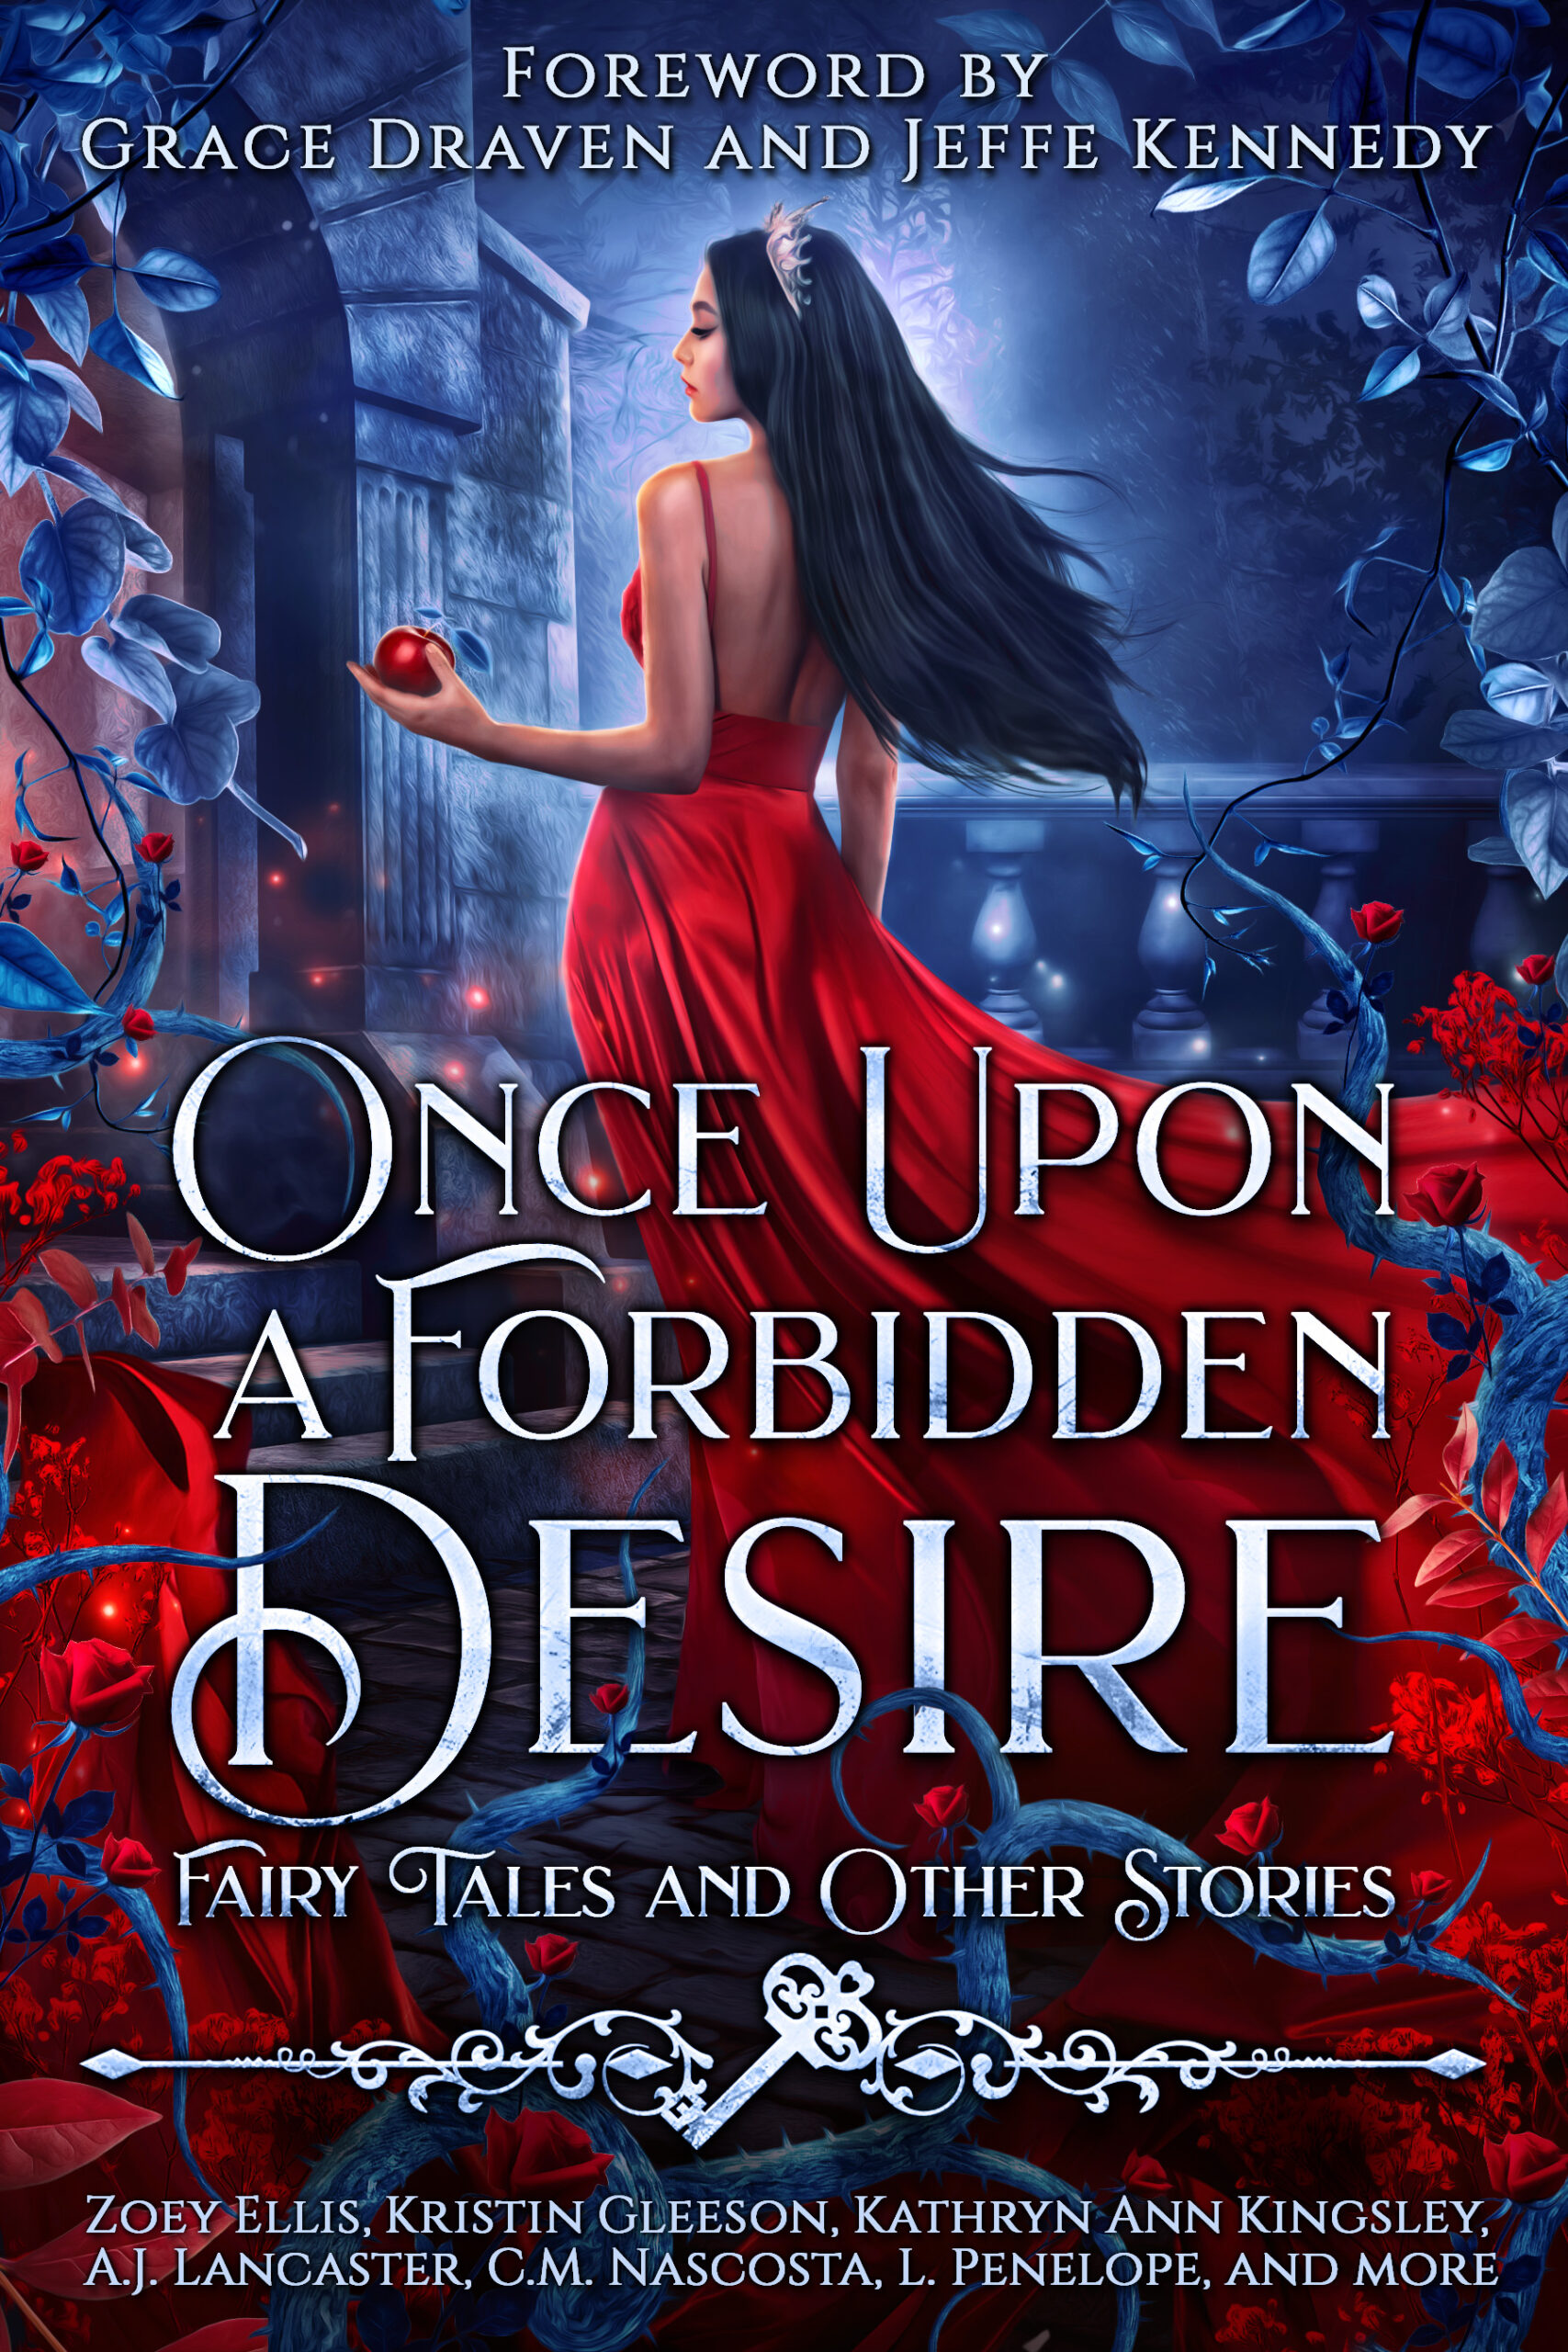 Once Upon a Forbidden Desire: Fairy Tales and Other Stories